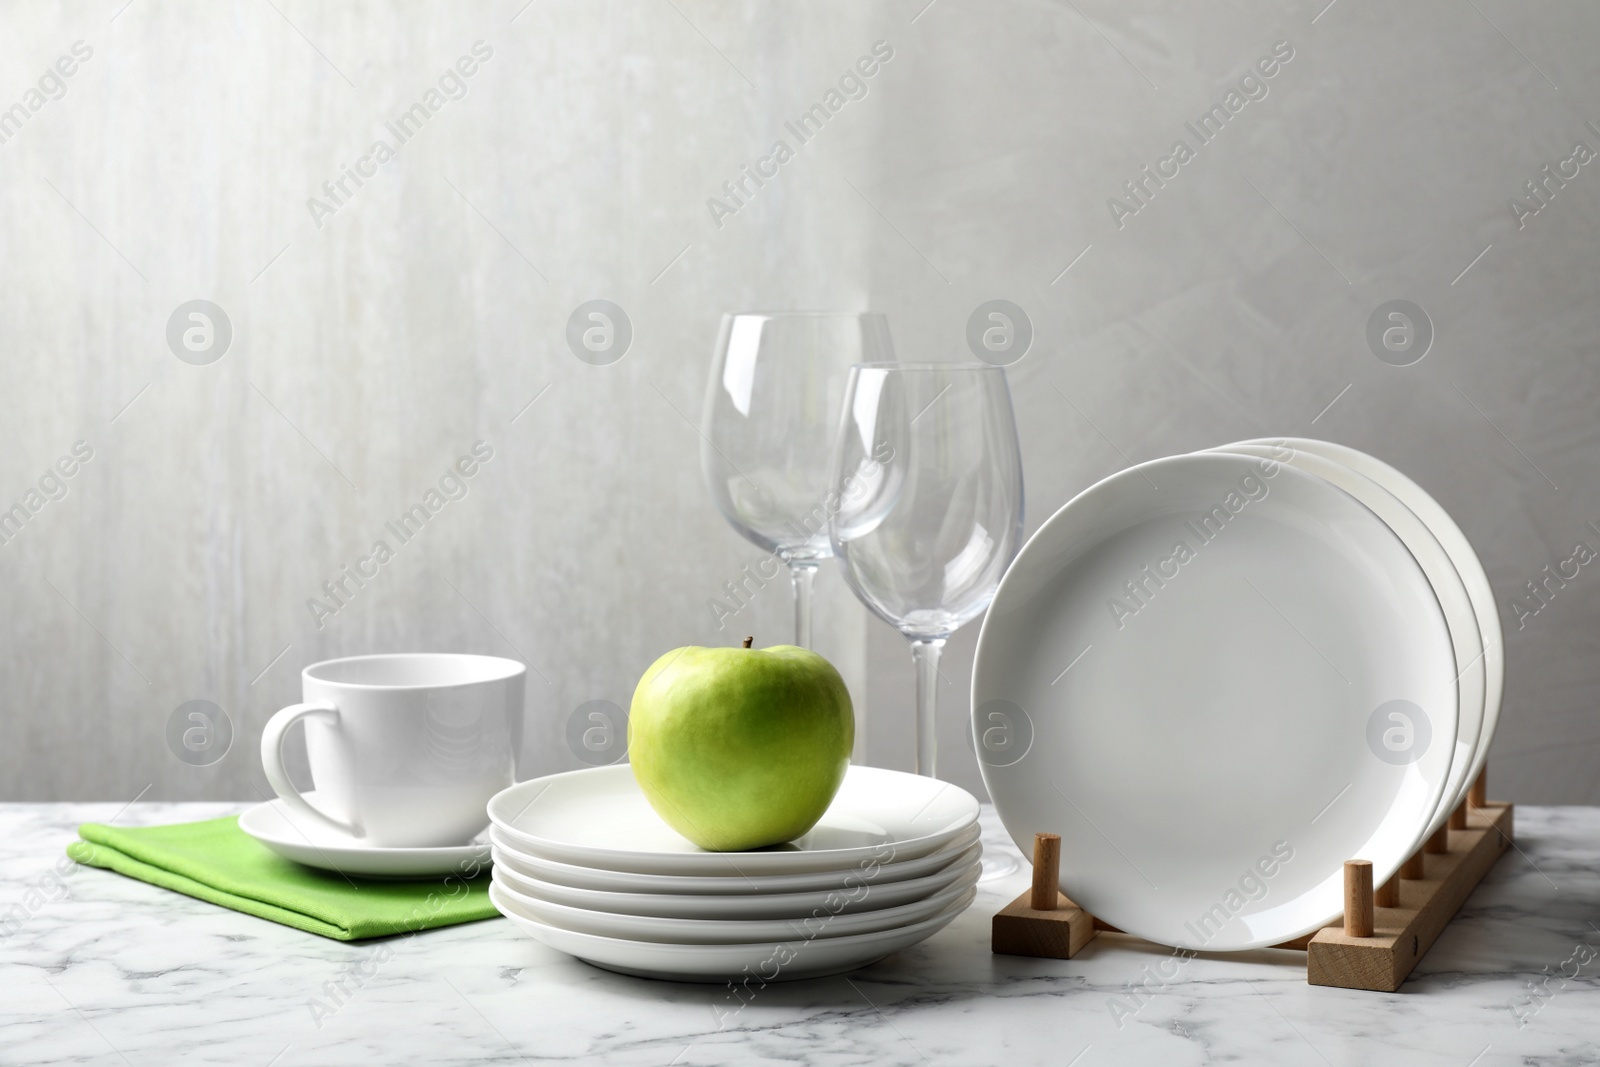 Photo of Set of clean dishware, glasses and apple on white marble table